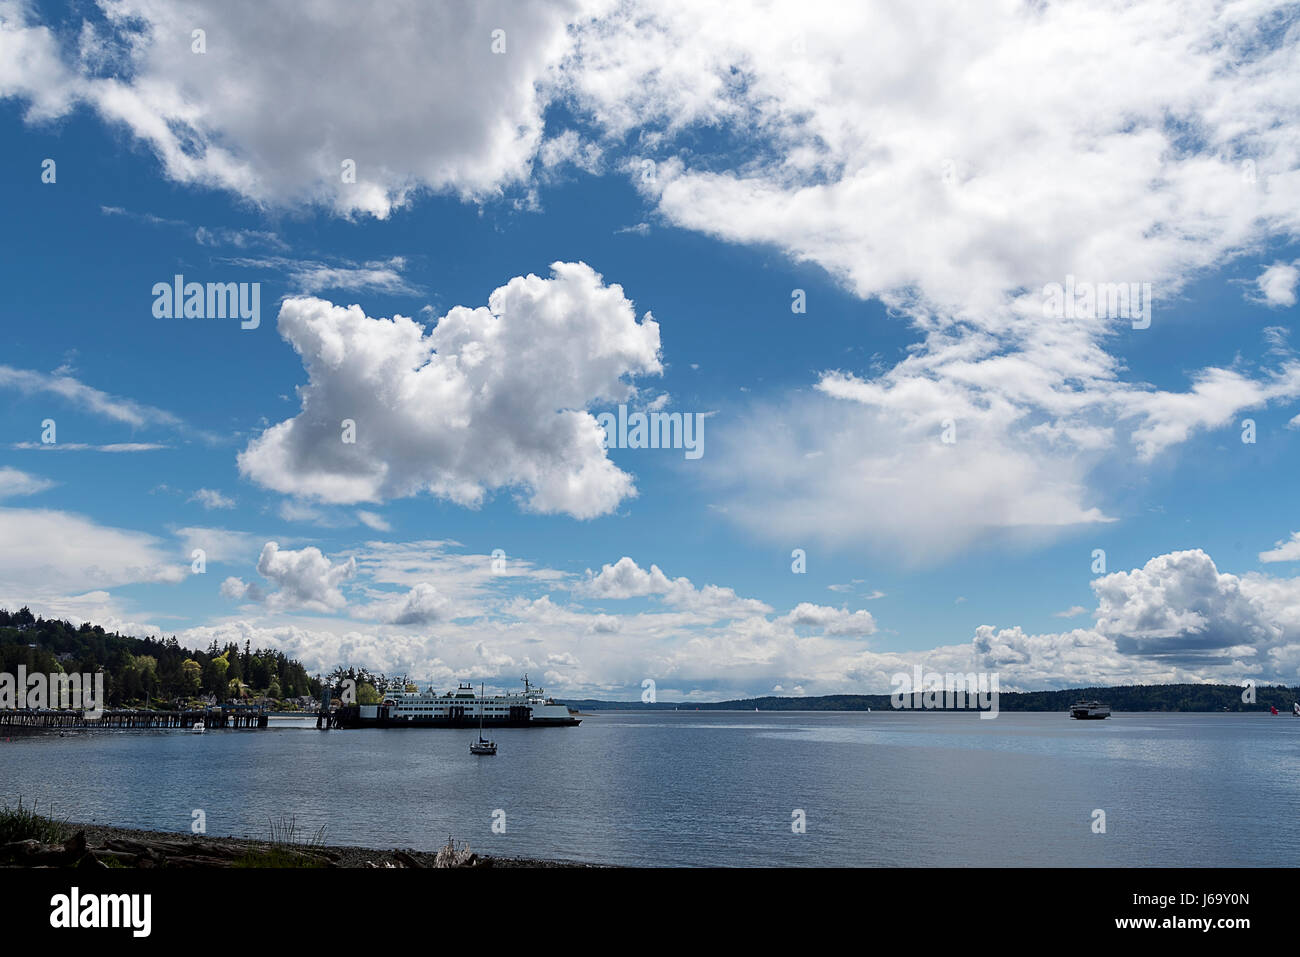 Summer sky over Puget sound with Ferry boat and billowing clouds Stock Photo